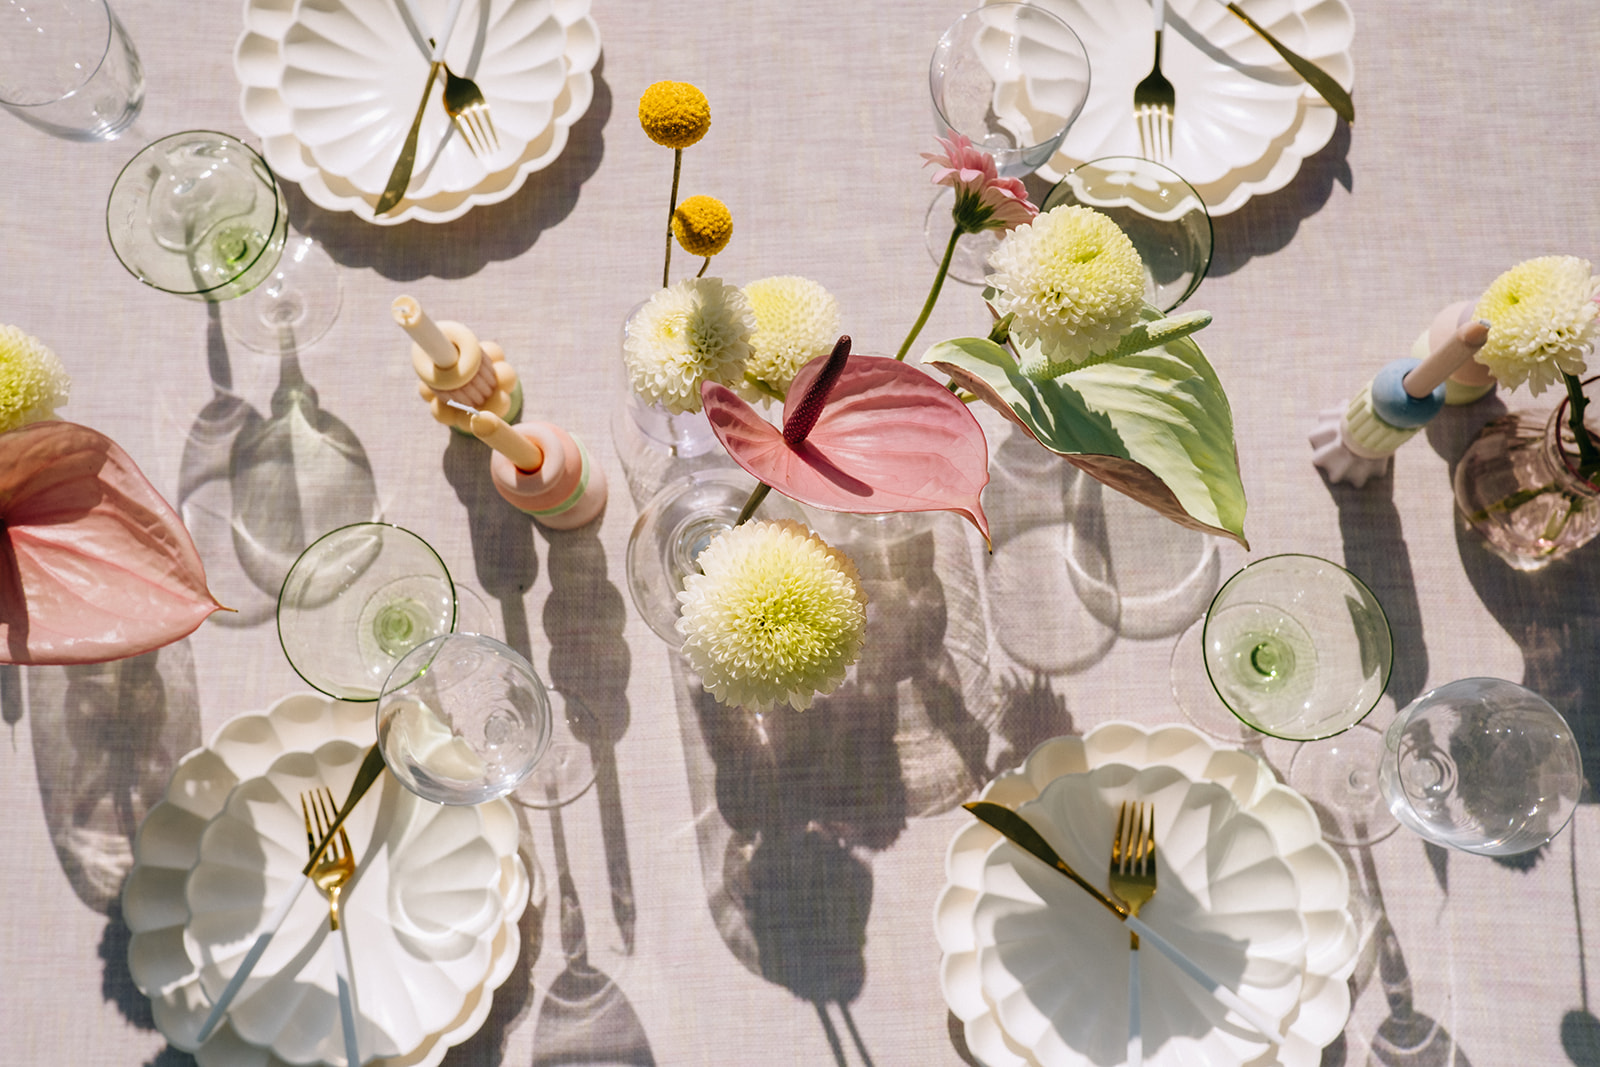 chartreuse and neon floral centrepieces by Hen and Chicks for a vibrant and summery combination, multiple unique vases in clear glass and pastel ceramics holding florals on a wedding guest table, pastel pink linen tablecloth ideas  